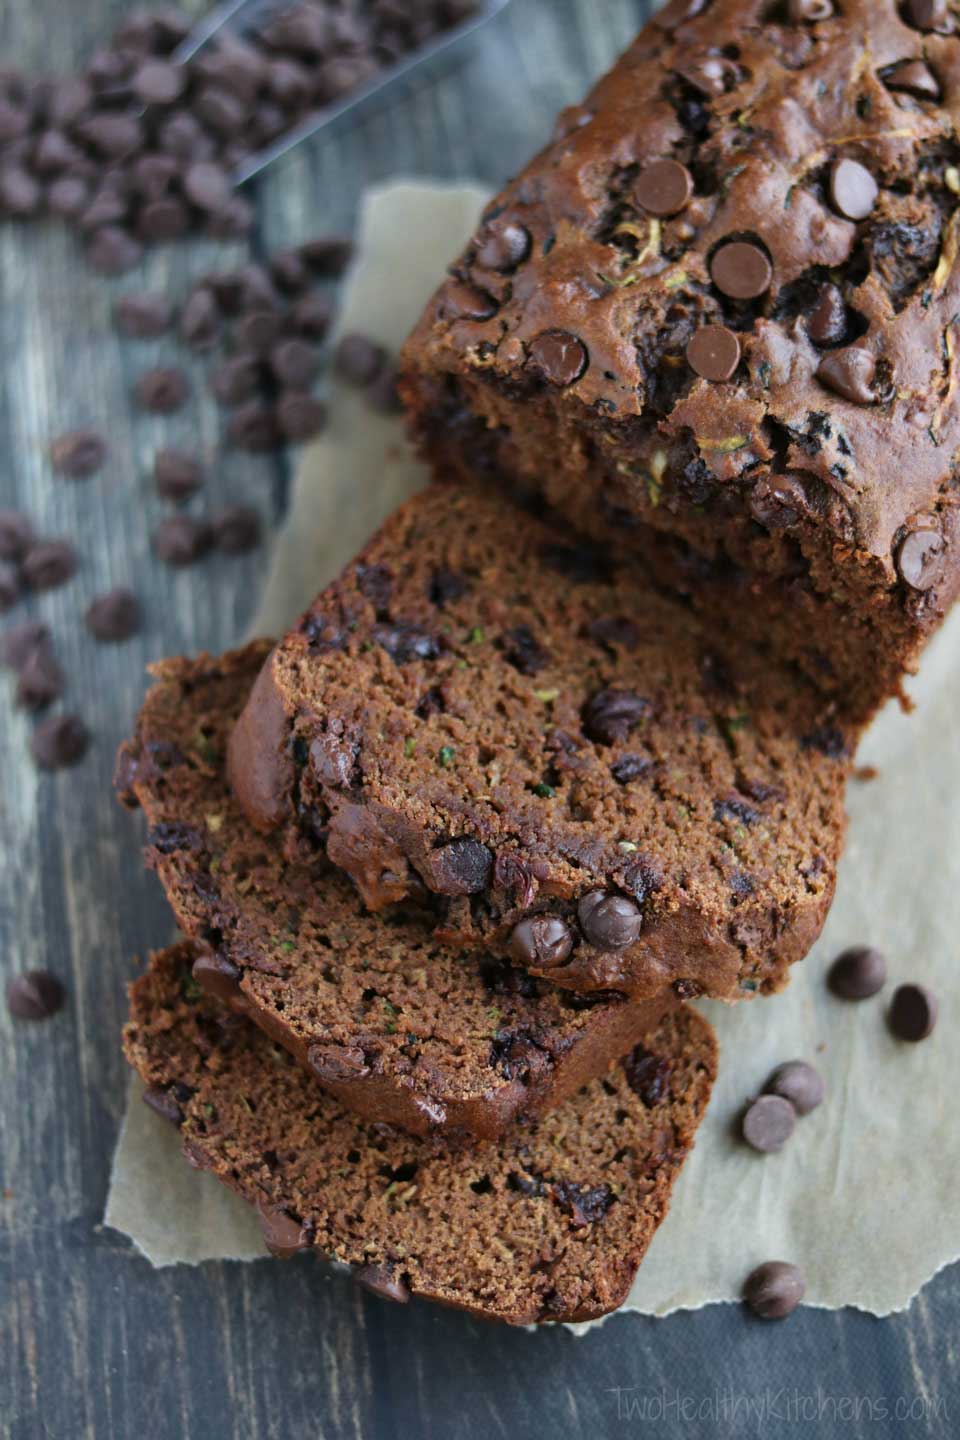 A chocolate-lover’s dream! Definitely no surprise that this healthy recipe for Cherry-Chocolate Zucchini Bread is so popular!